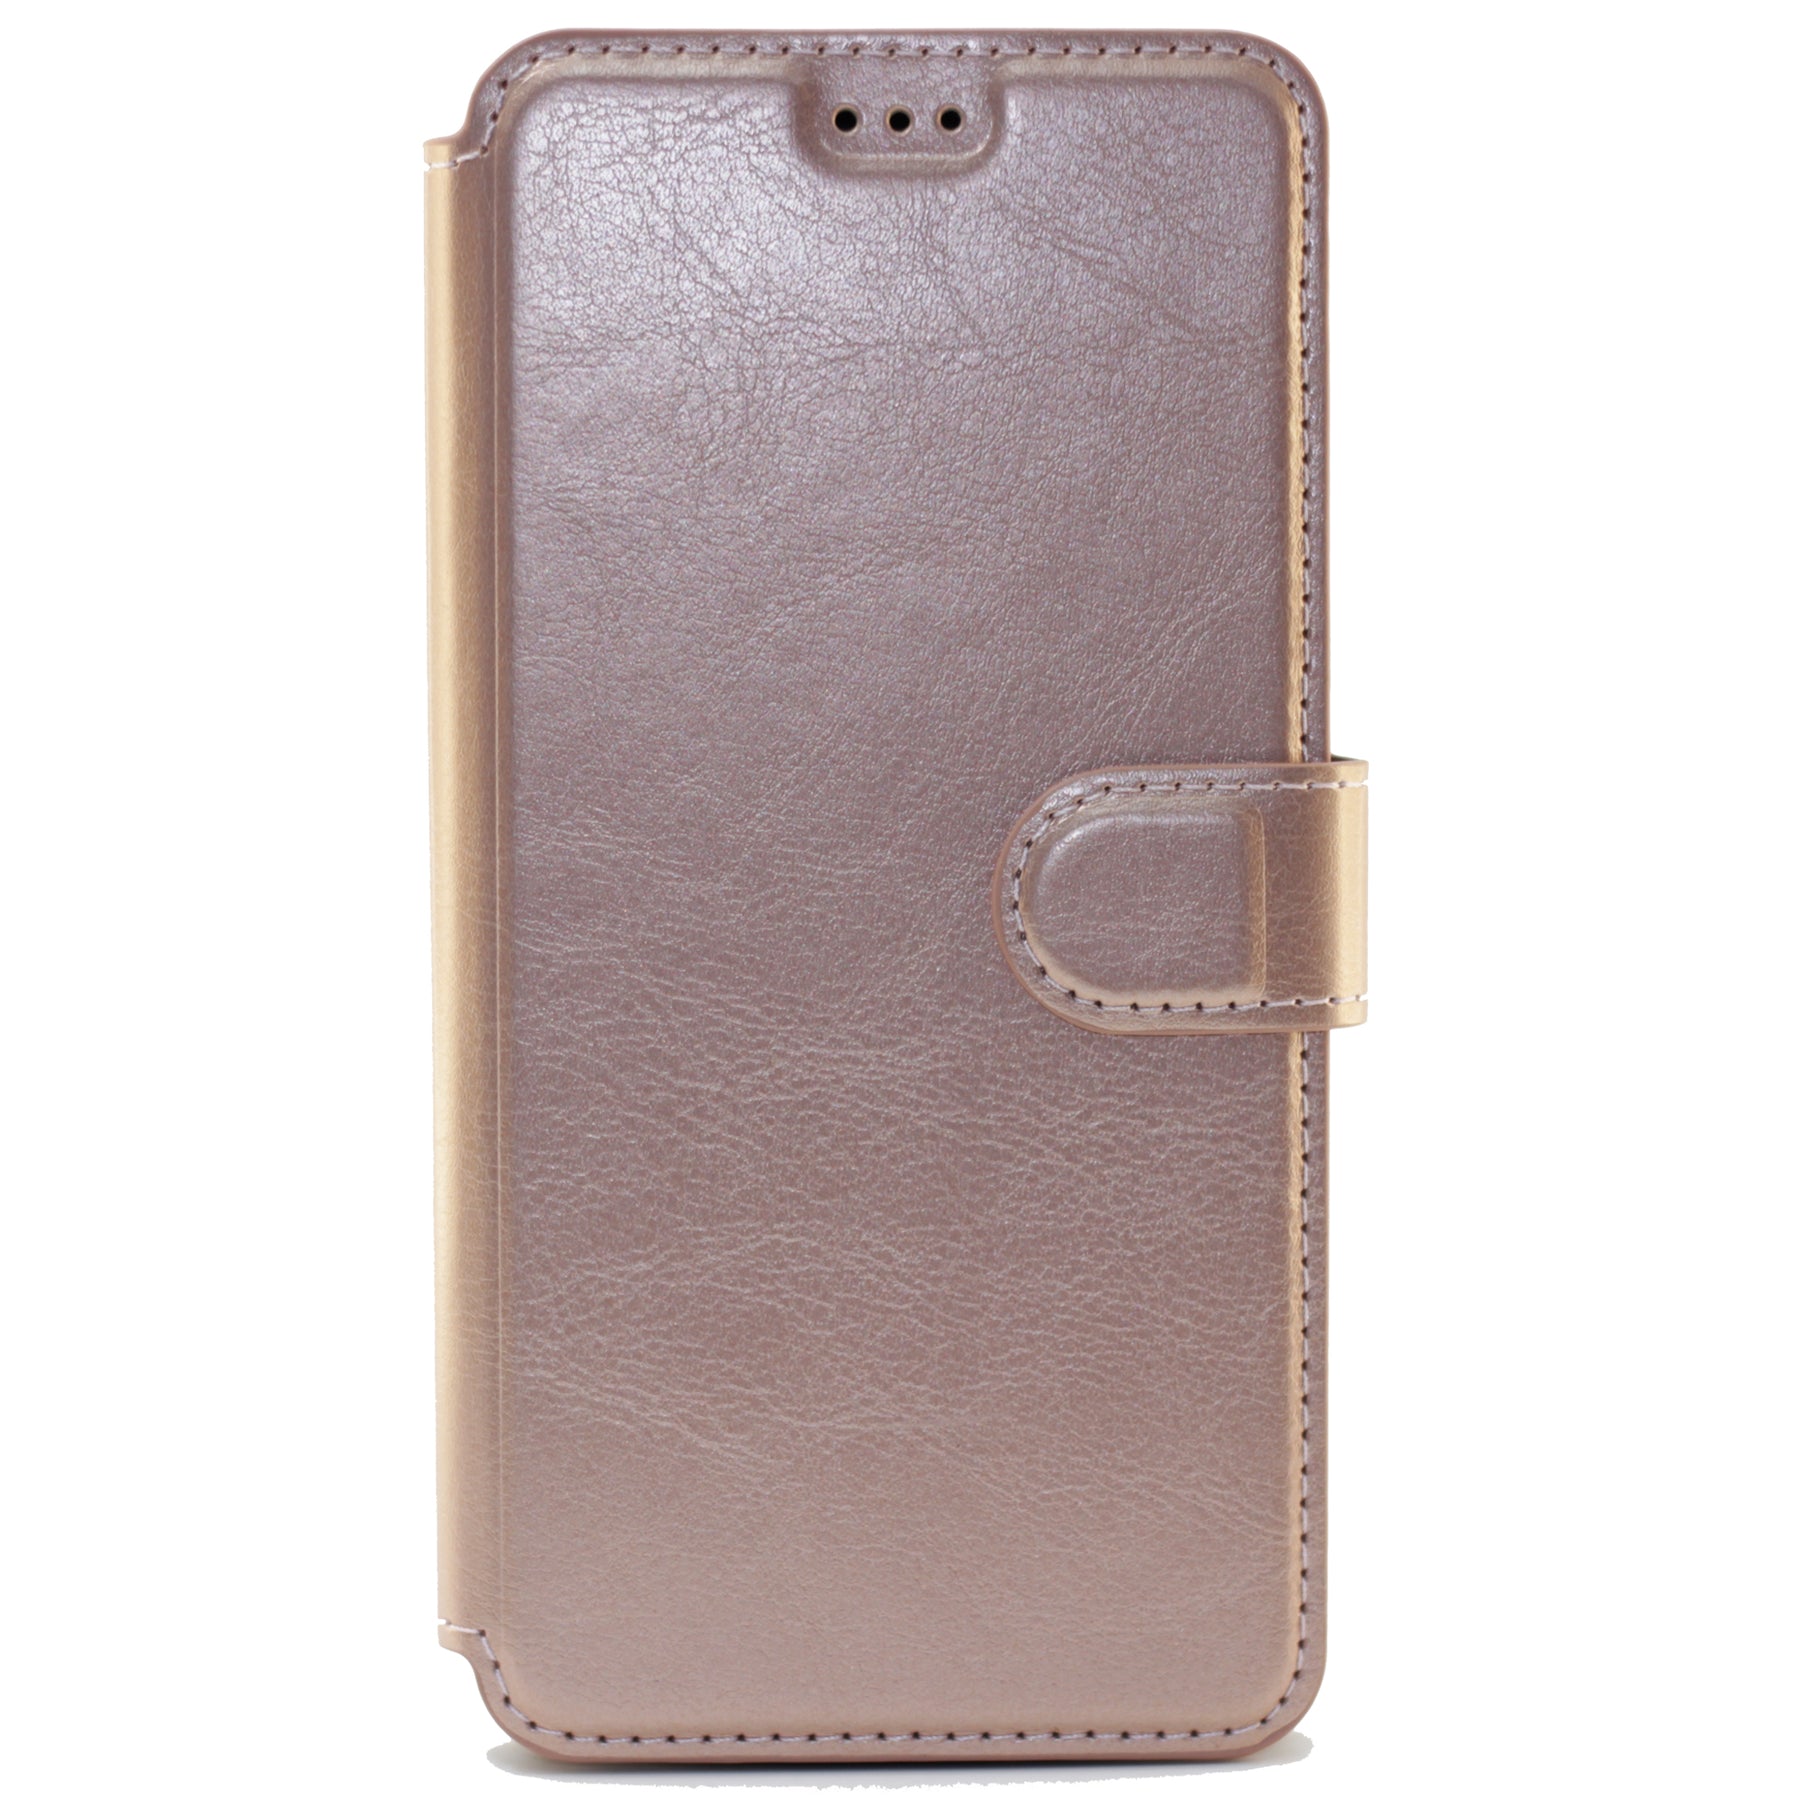 Samsung A10, Leather Wallet Case, rose Gold